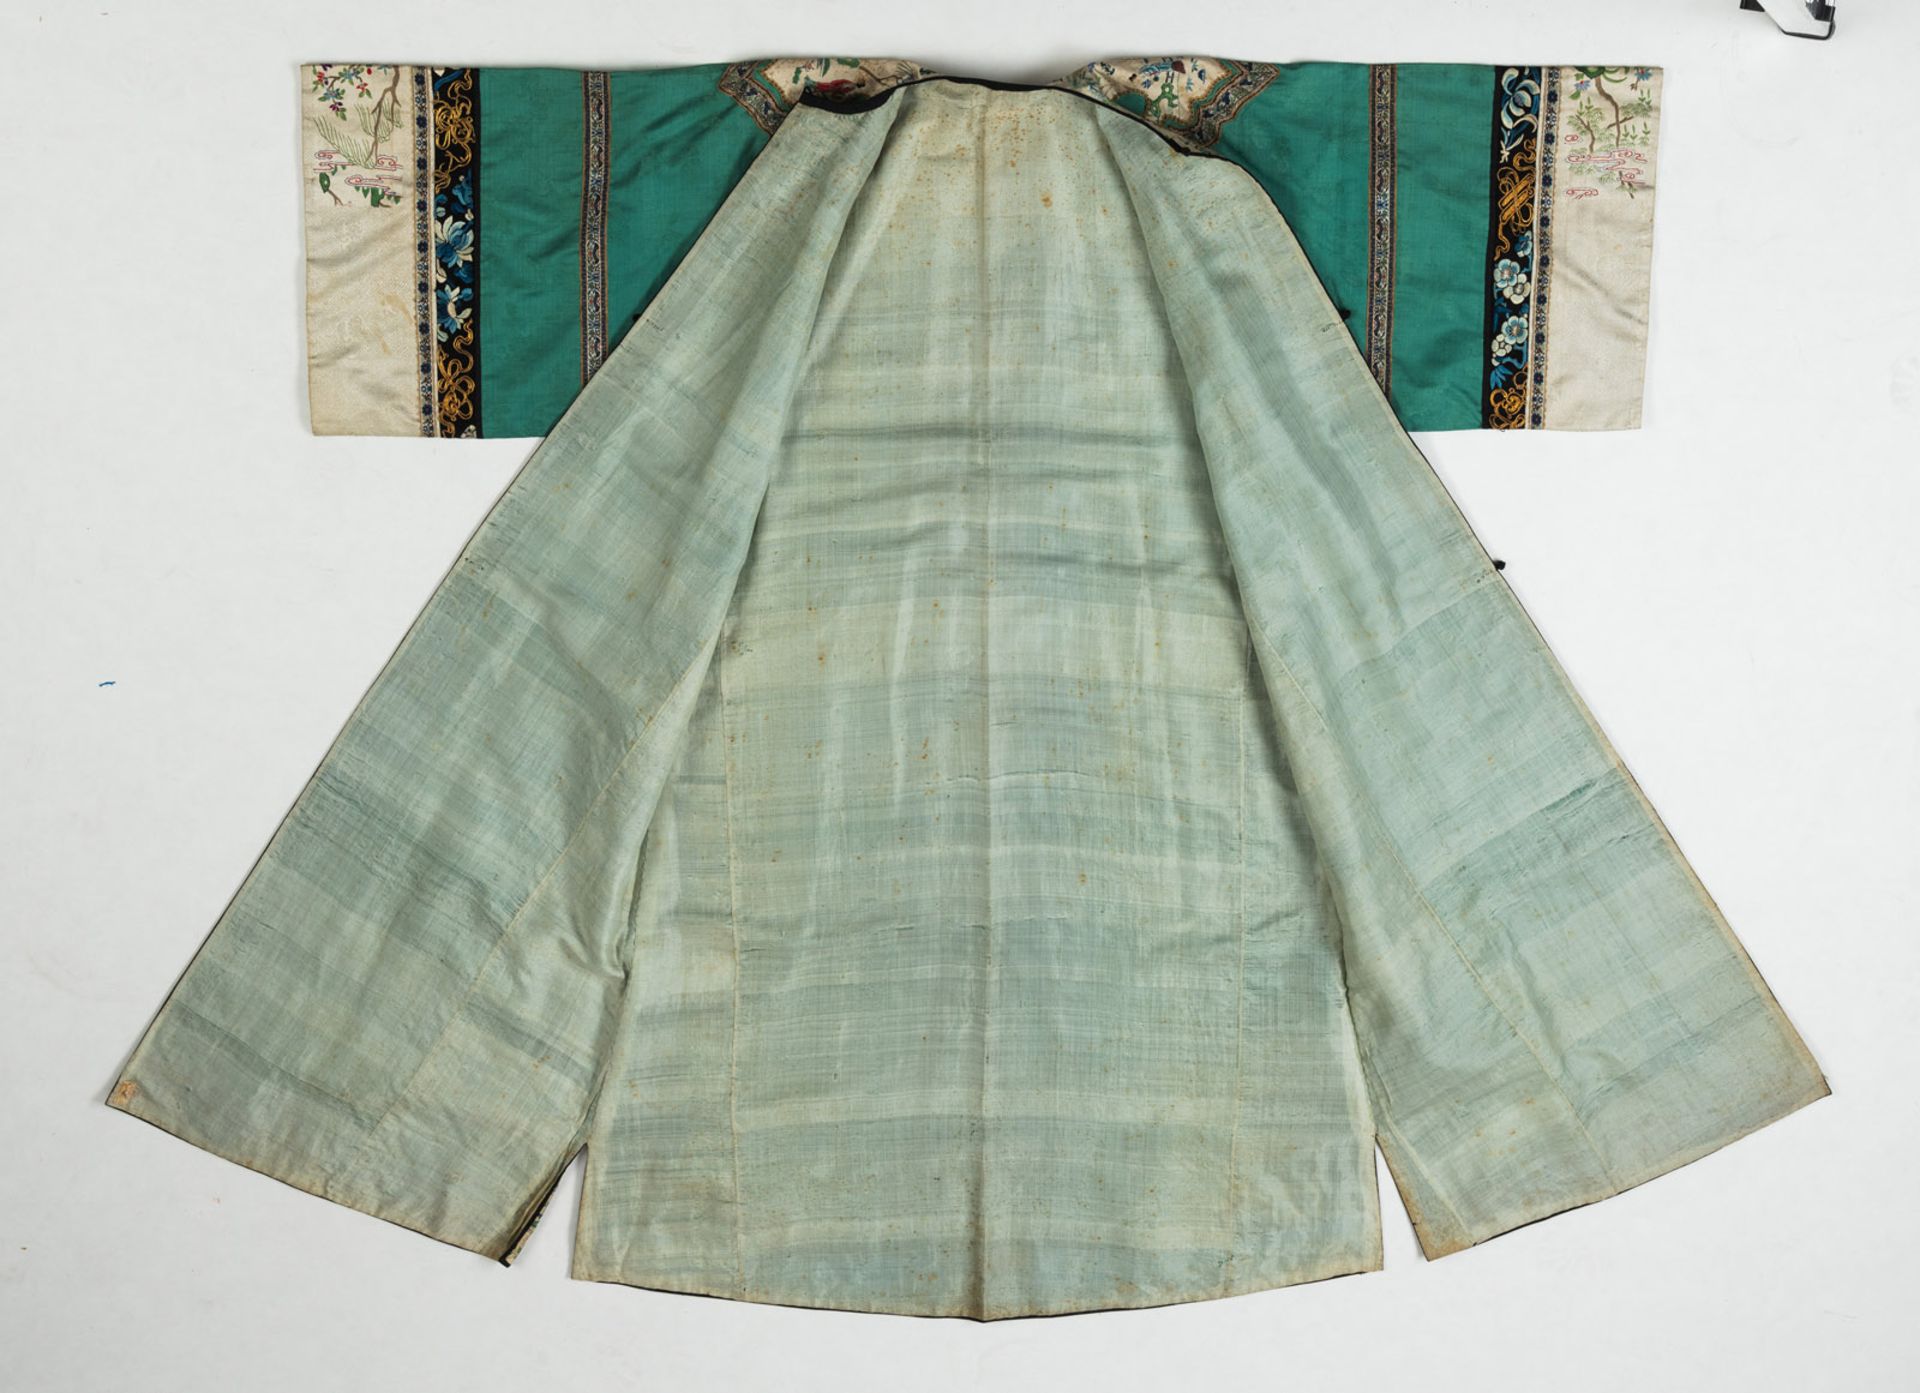 A LADY'S SILK MAST OVERROBE WITH EMBROIDERED AND WOVEN BORDERS - Image 2 of 3